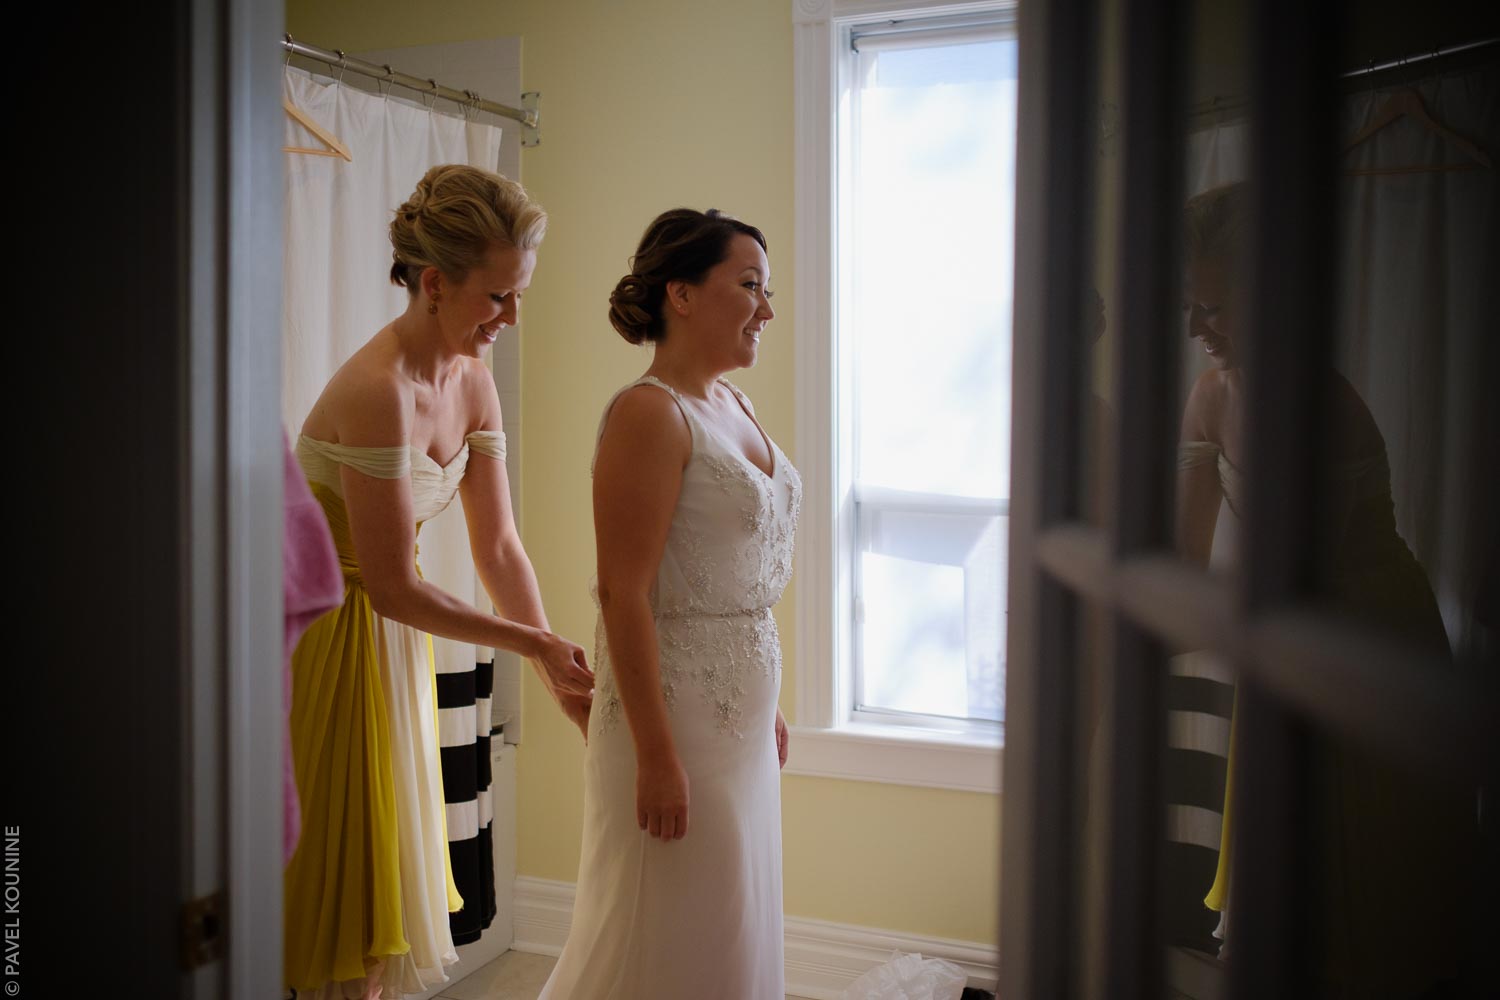 Timeless wedding photography of bride with maid of honour helping with the wedding dress.